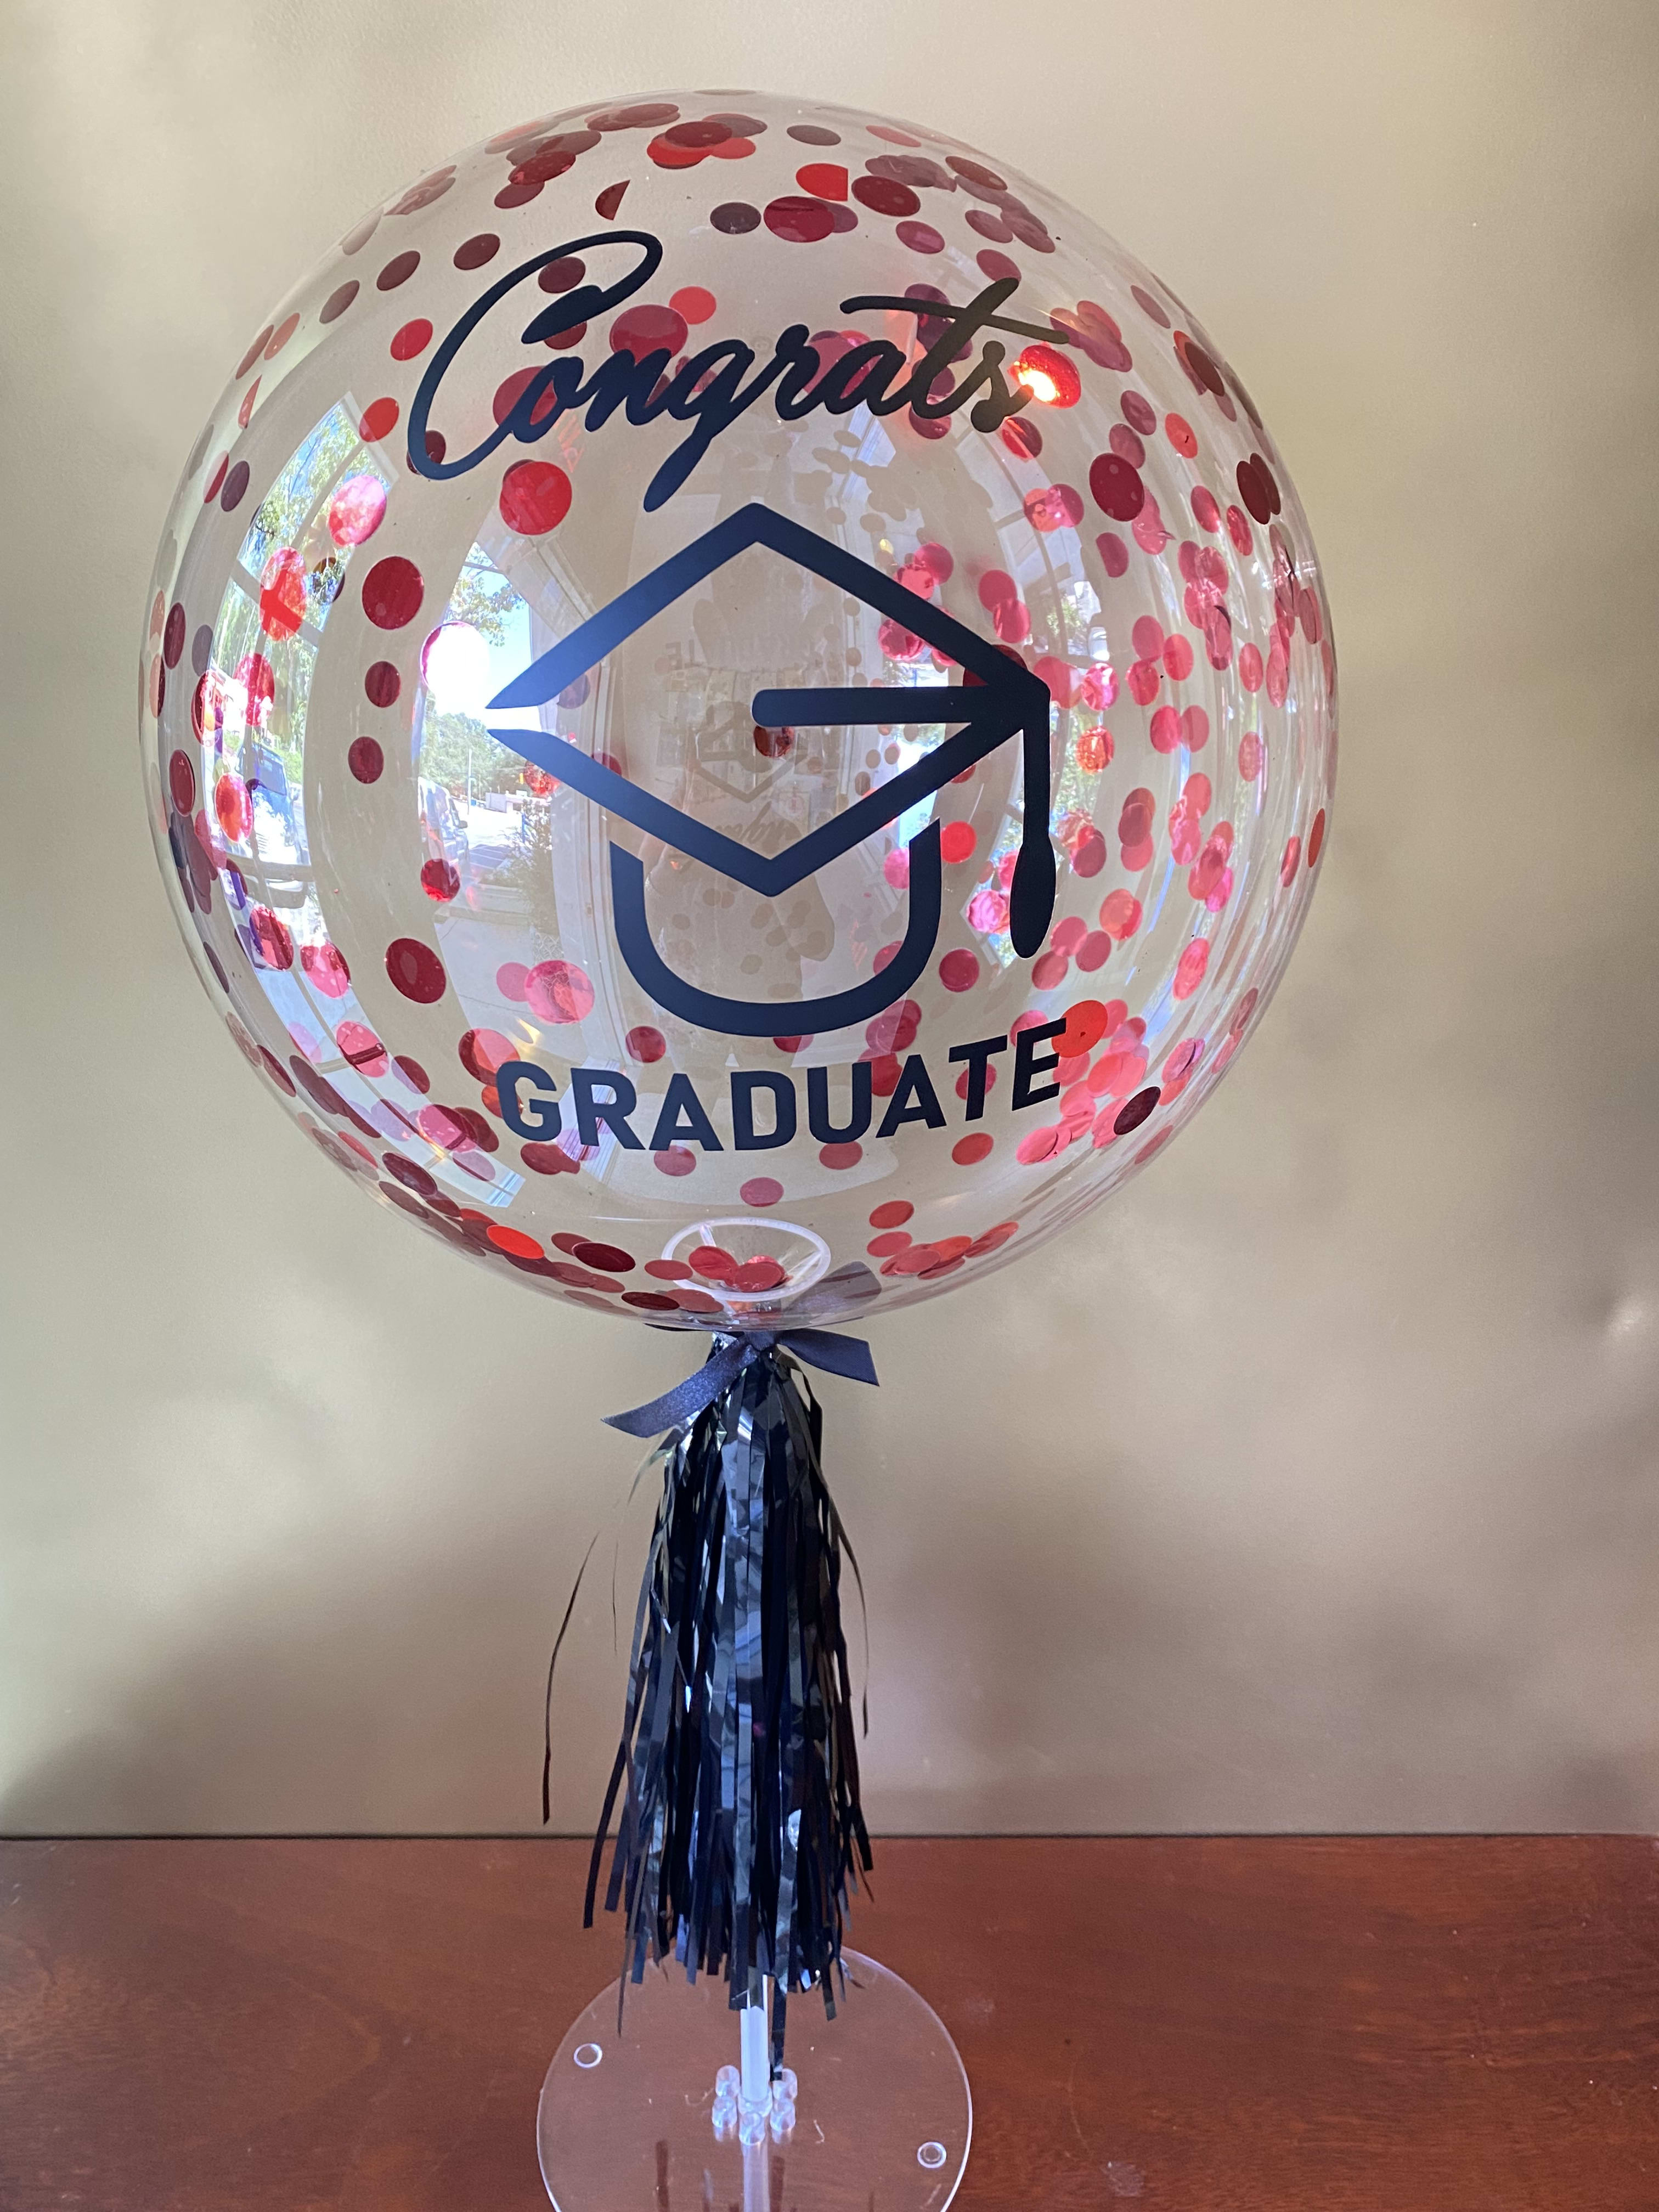 Graduation Balloon  - Say congratulations to the graduate with this eccentric balloon!